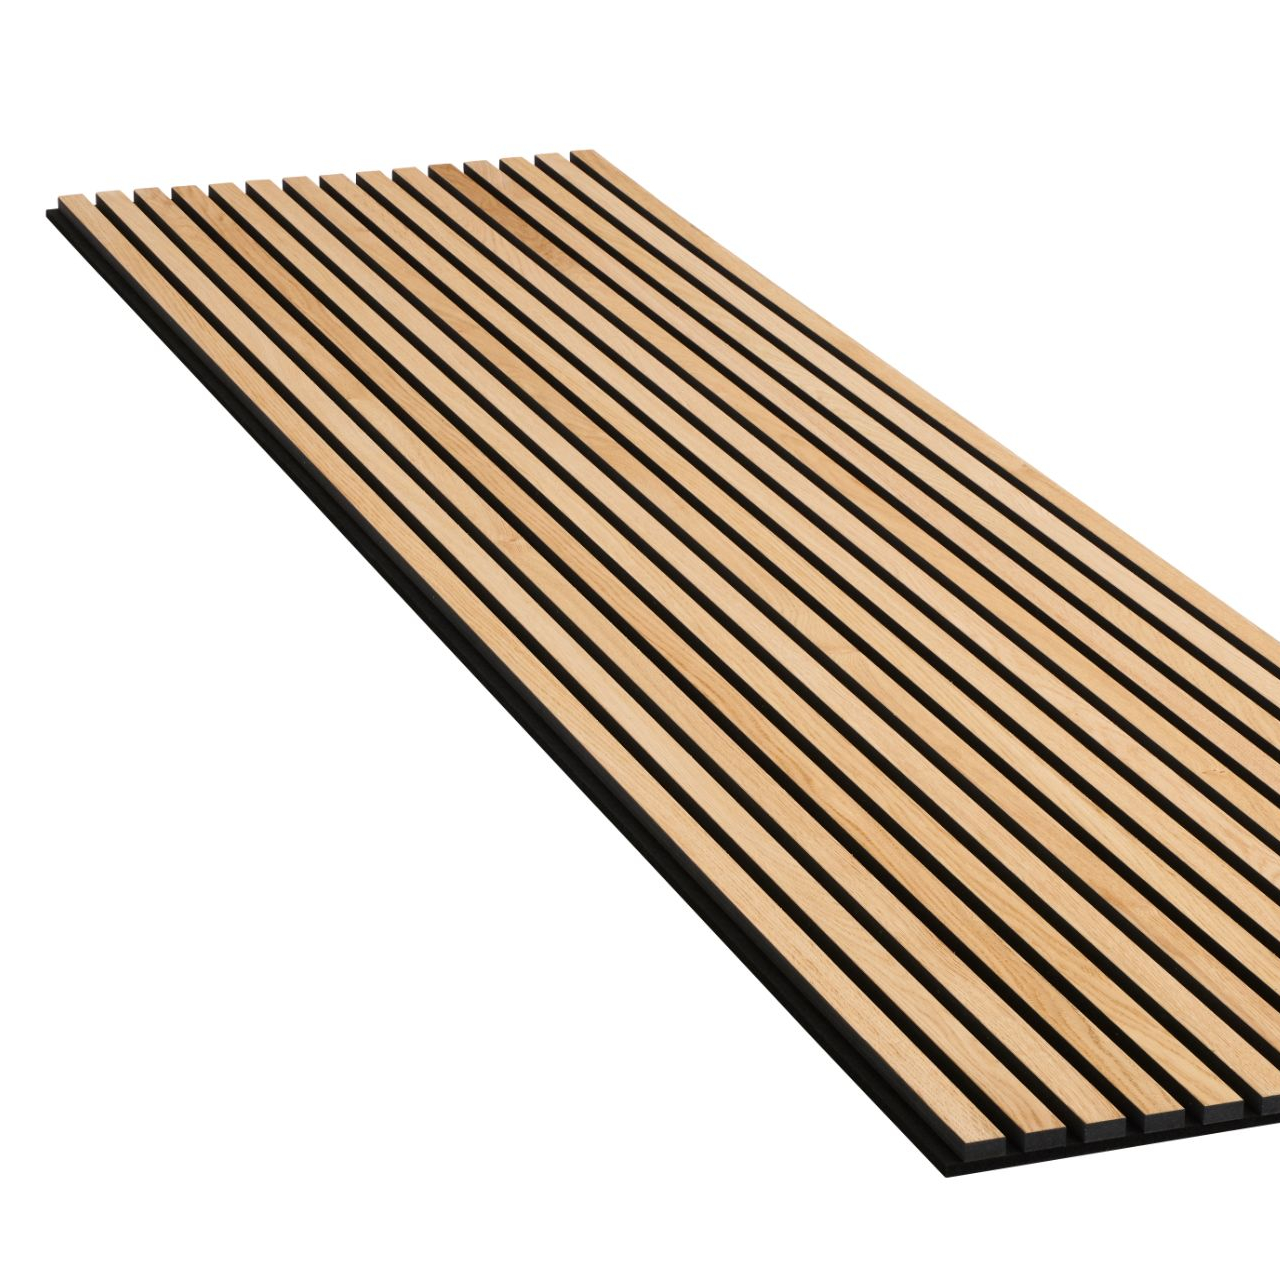 What is Wooden slat panel